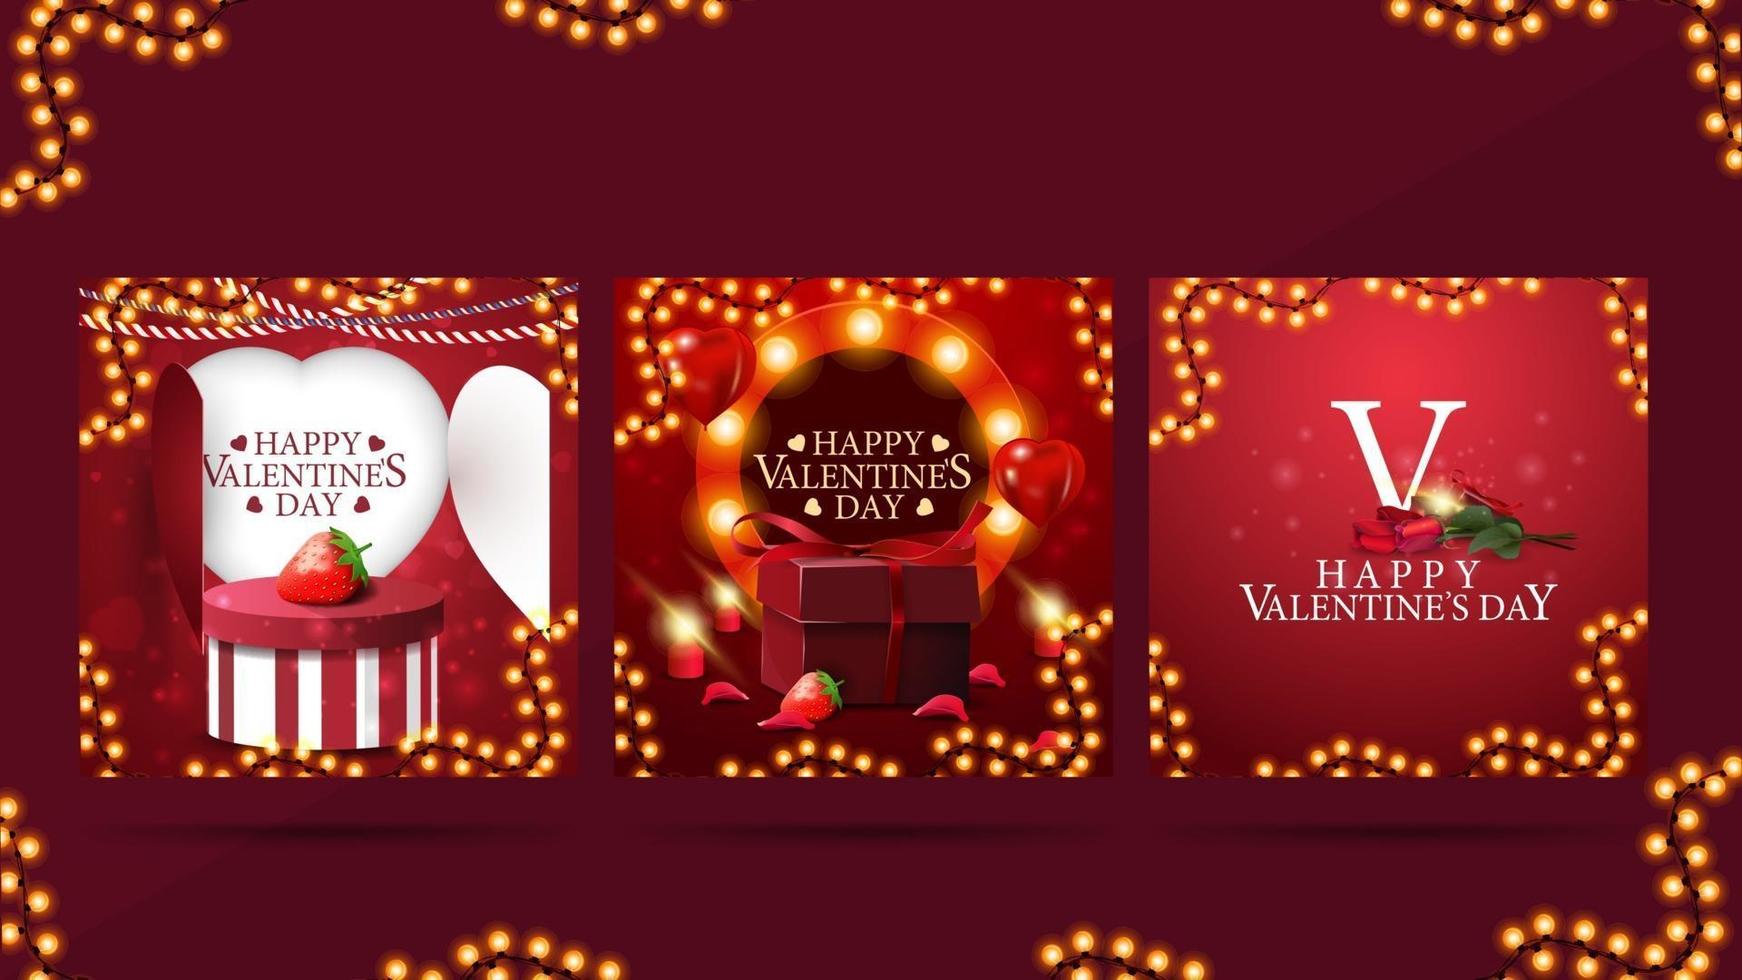 Set of Valentine's greeting cards with Valentine's elements, bright warm template frame and presents vector